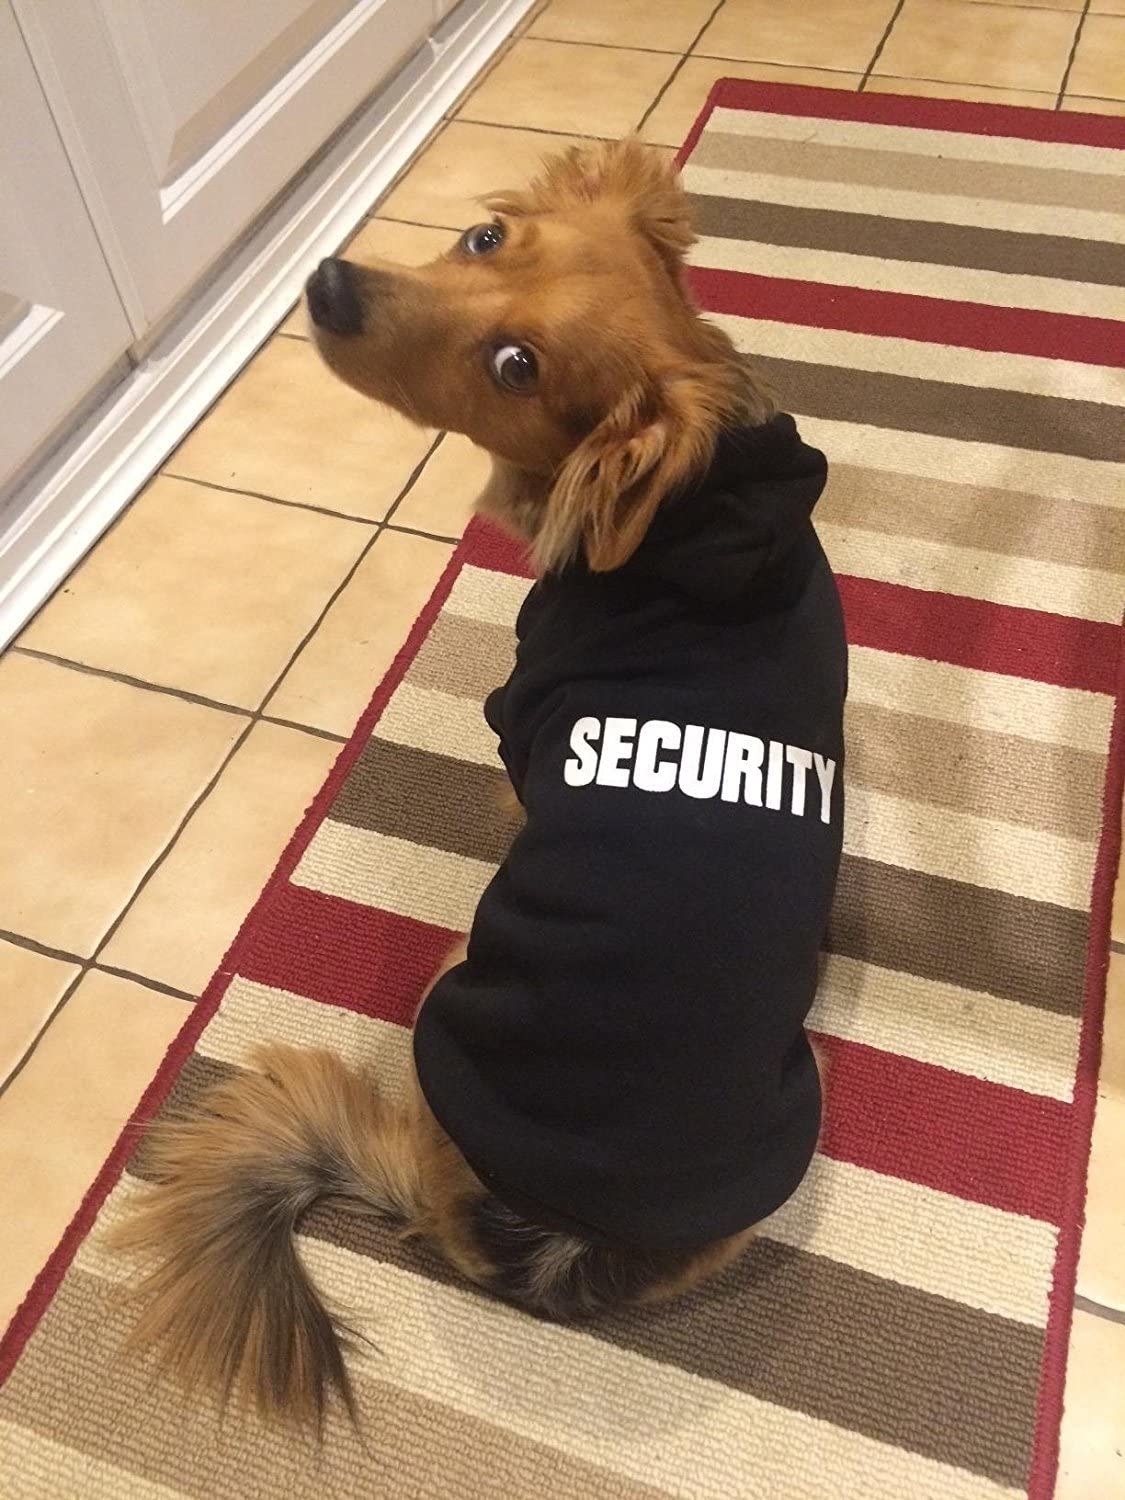 A dog in a black sweatshirt that says SECURITY